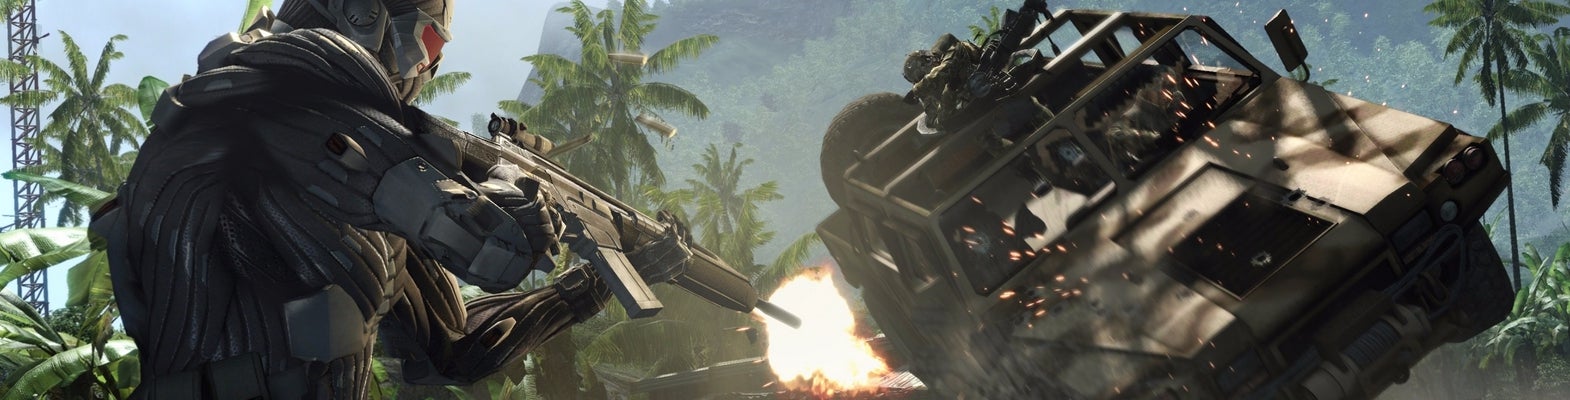 Image for Revisiting Crysis, the last great bastion of PC elitism